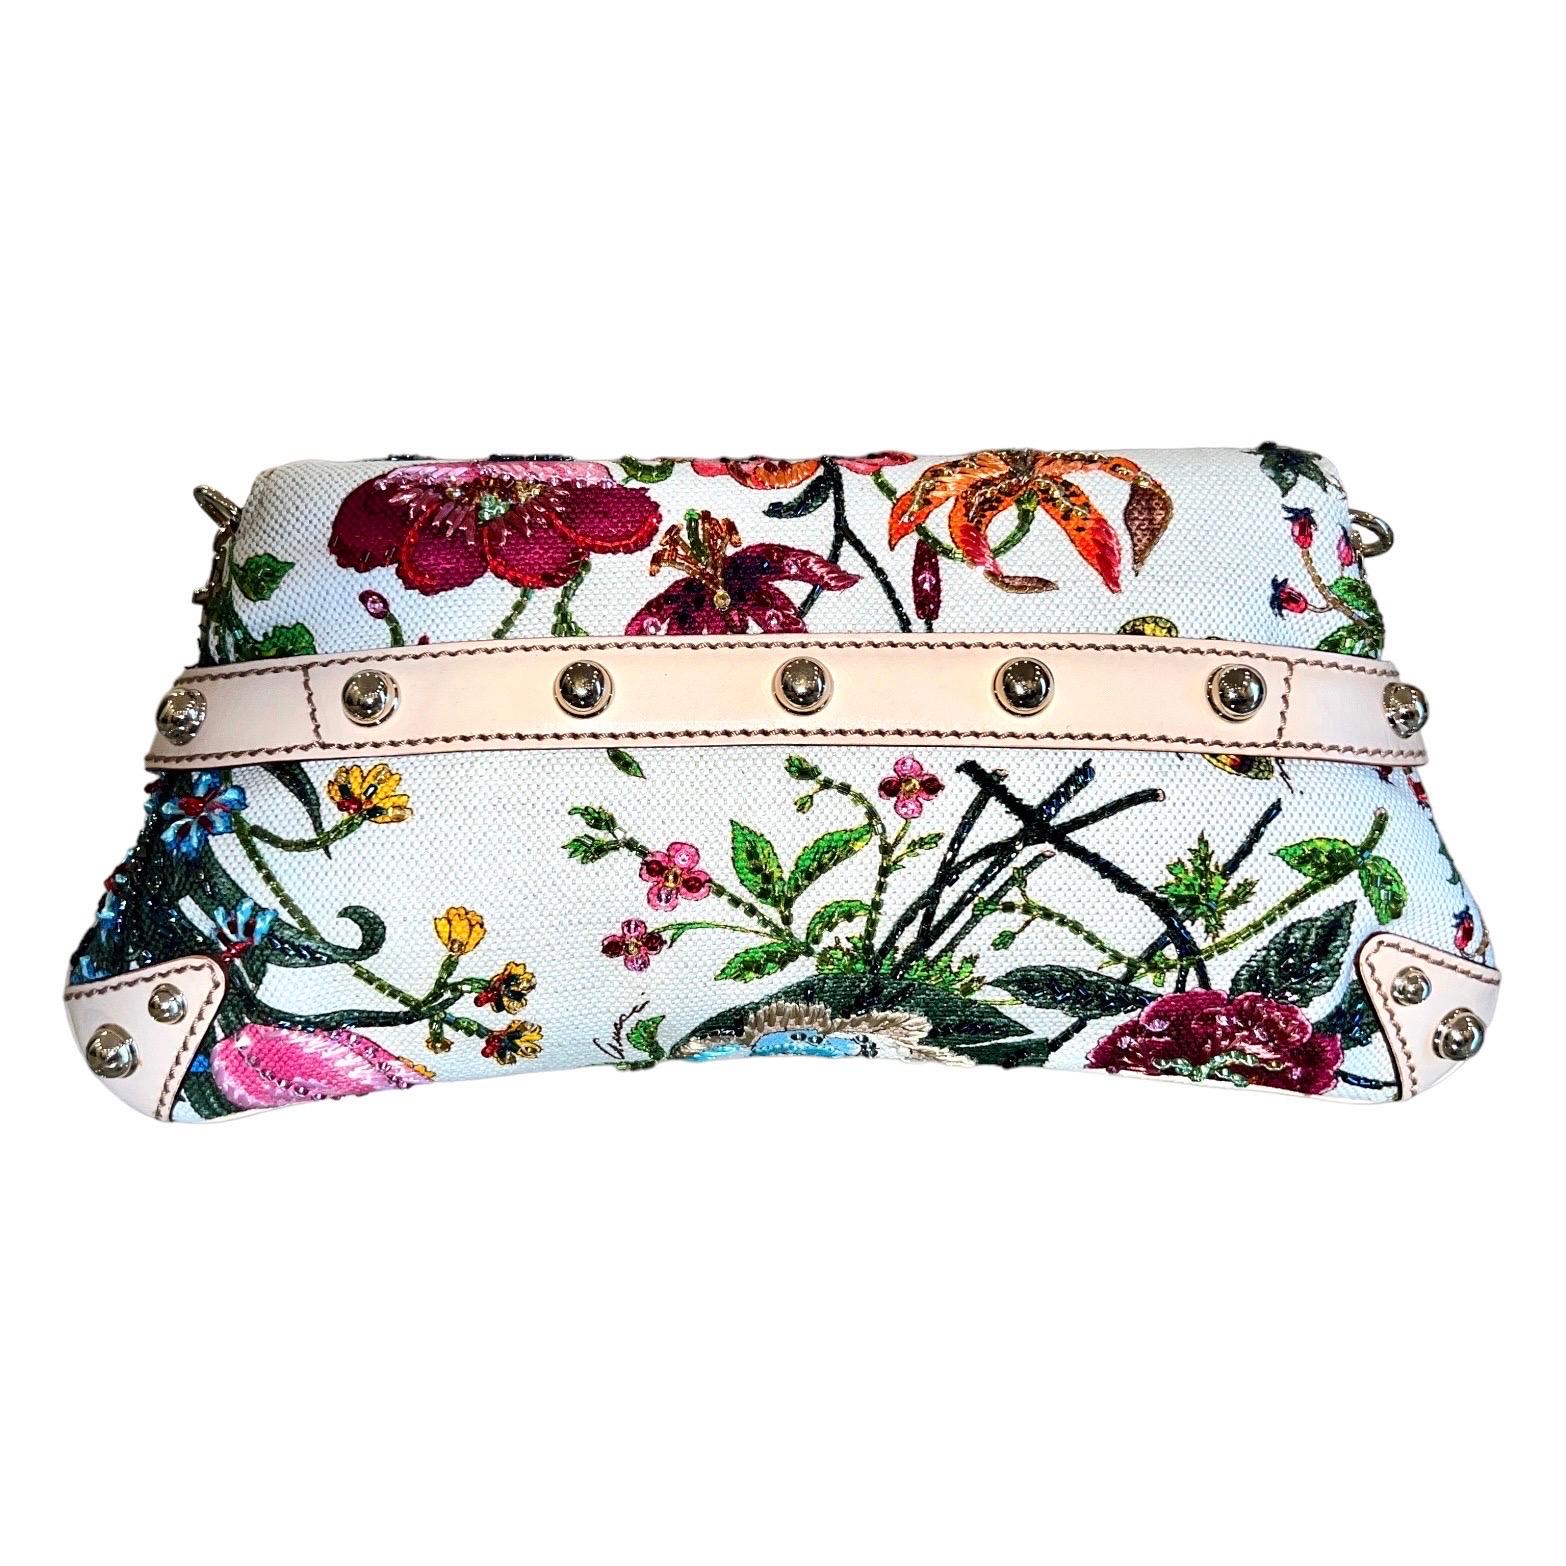 EXTREMELY RARE

GUCCI FLORAL FLORA BEADED SIGNATURE HORSEBIT BAG


LIMITED EDITON - ONLY VERY FEW PIECES WERE PRODUCED OF THIS GORGEOUS BAG AND SOLD IN FLAGSHIP STORES TO A SELECTED CLIENTELE

DETAILS: 

A GUCCI signature piece that will last you